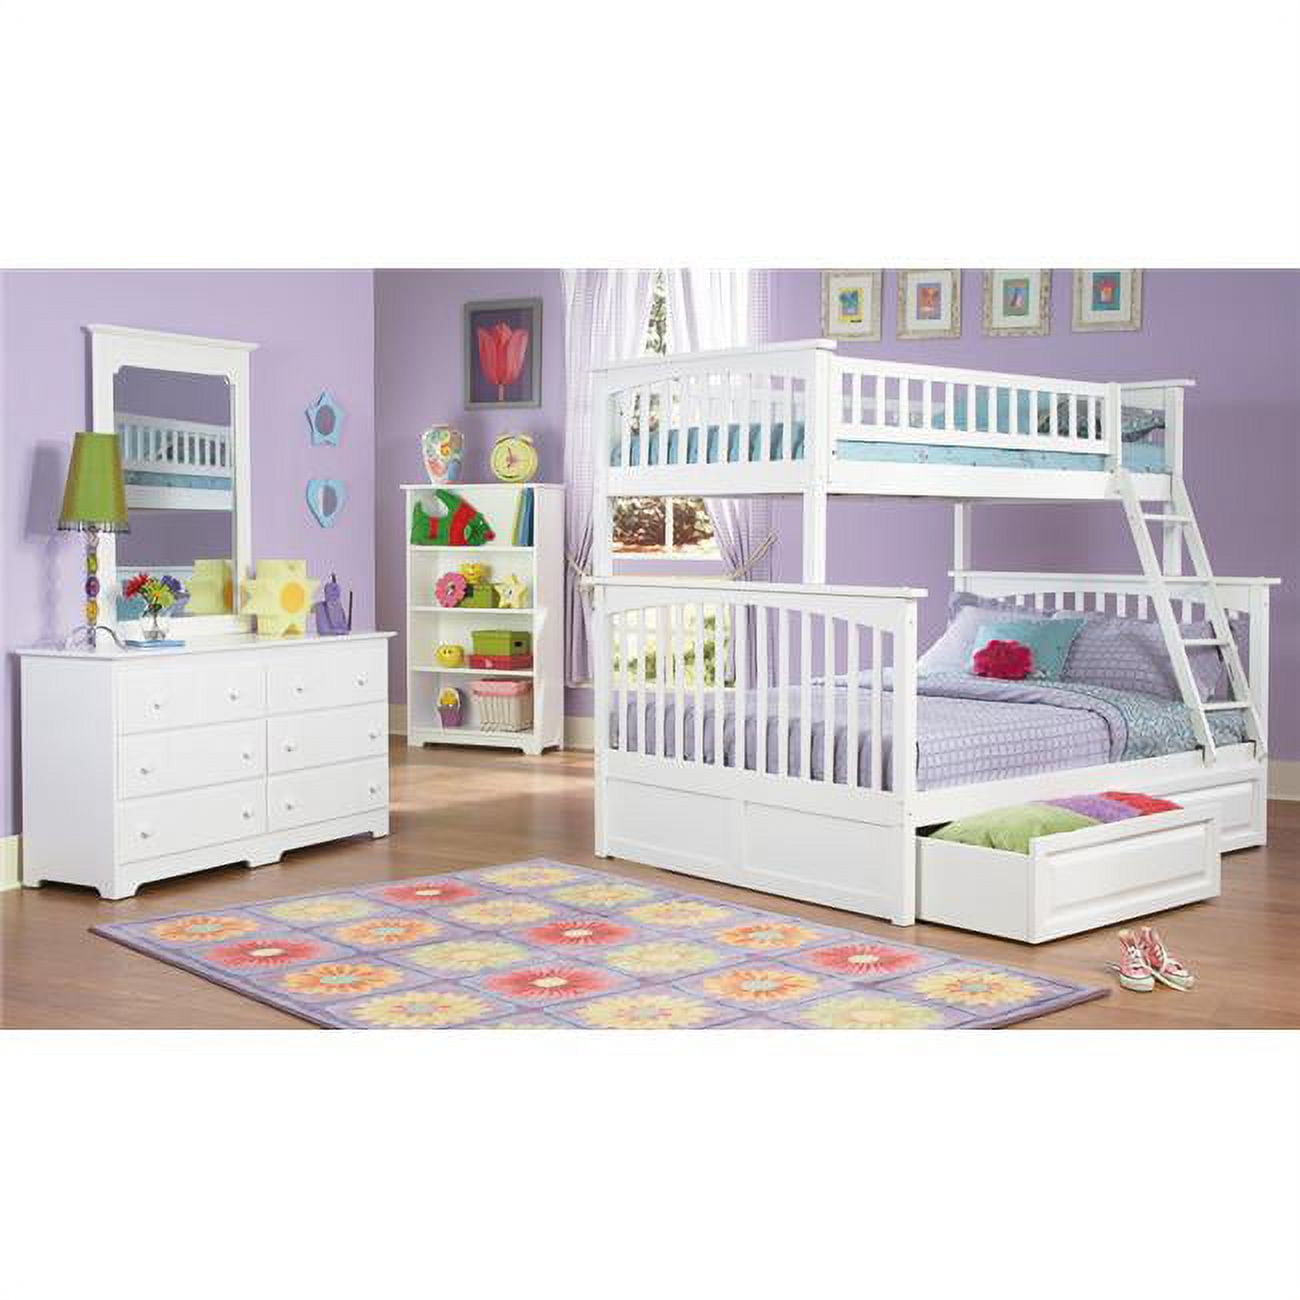 Columbia Bunkbed With Raised Panel Under Bed Storage Drawers - White, Twin Over Full Size